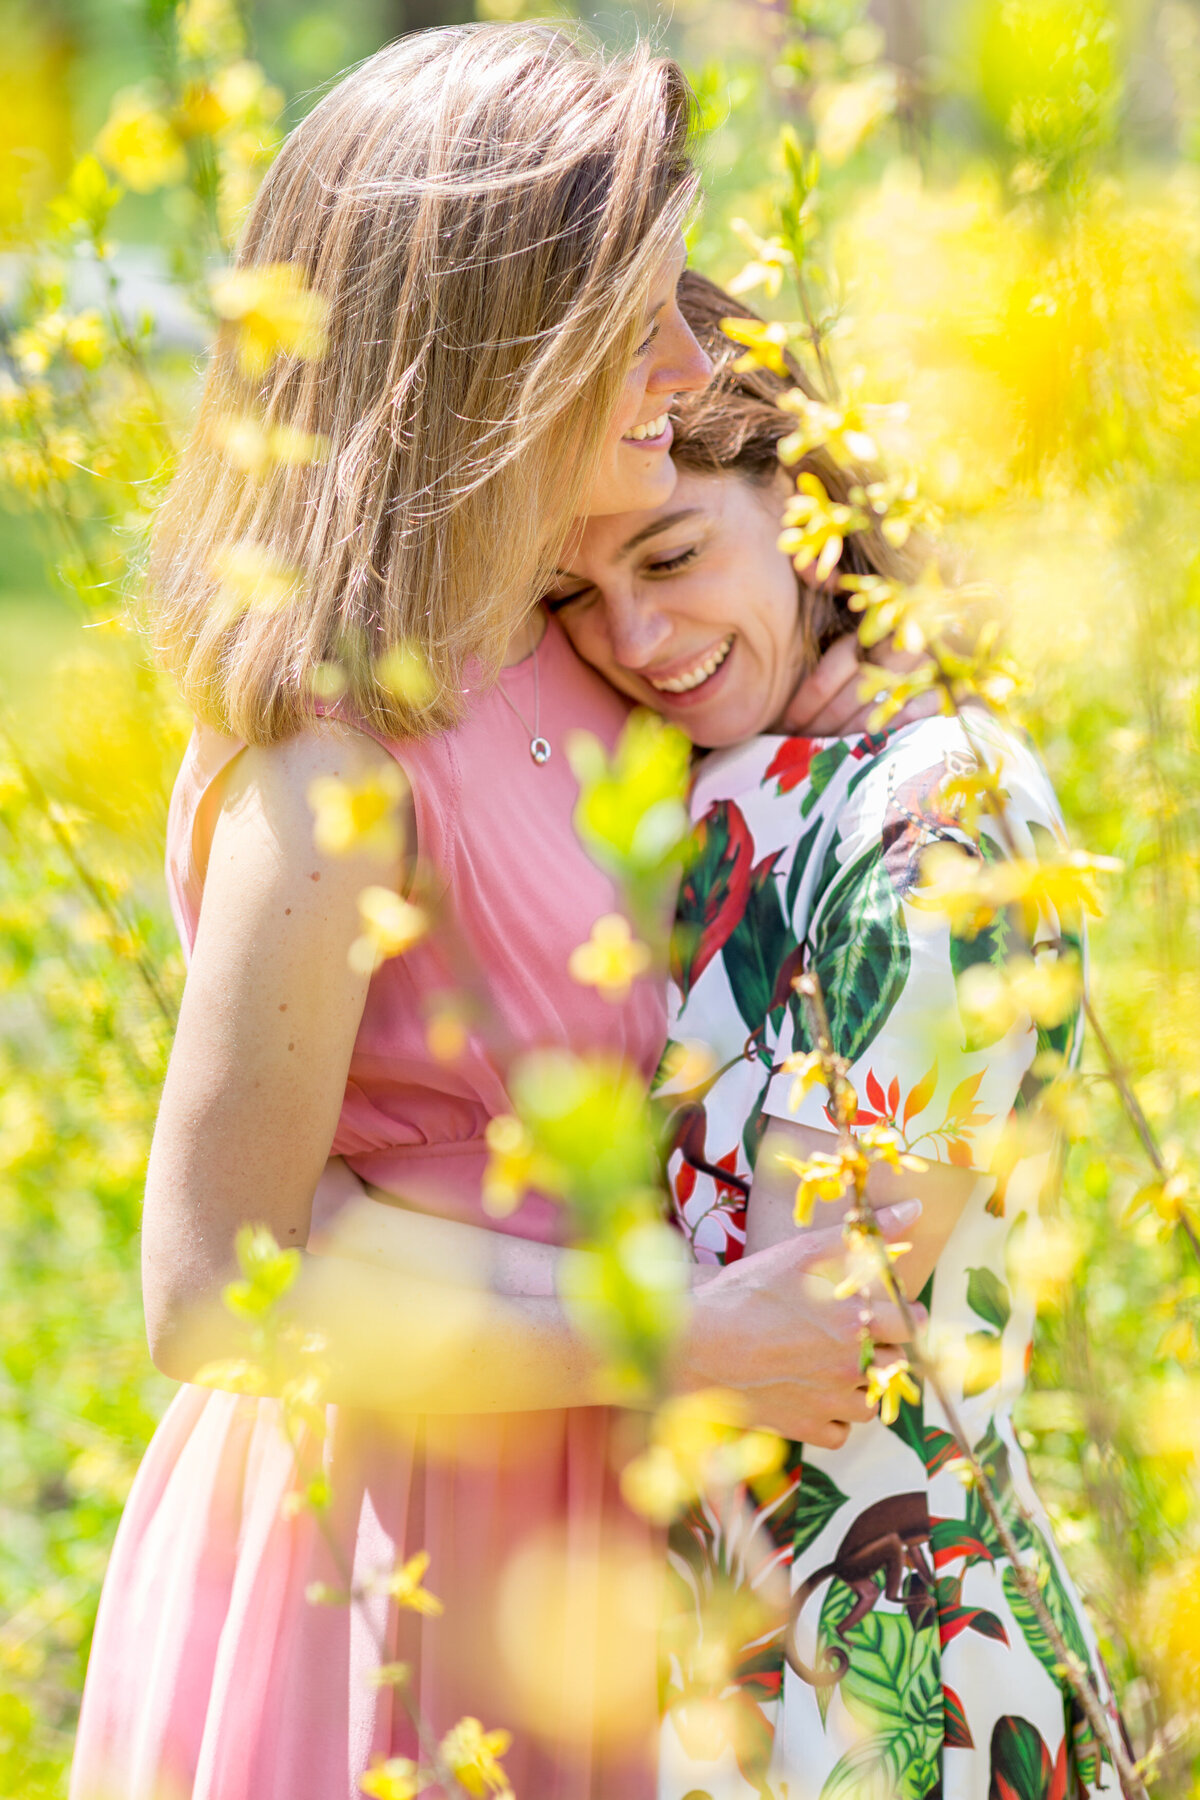 Two brides hugging in a field of tall flowers.